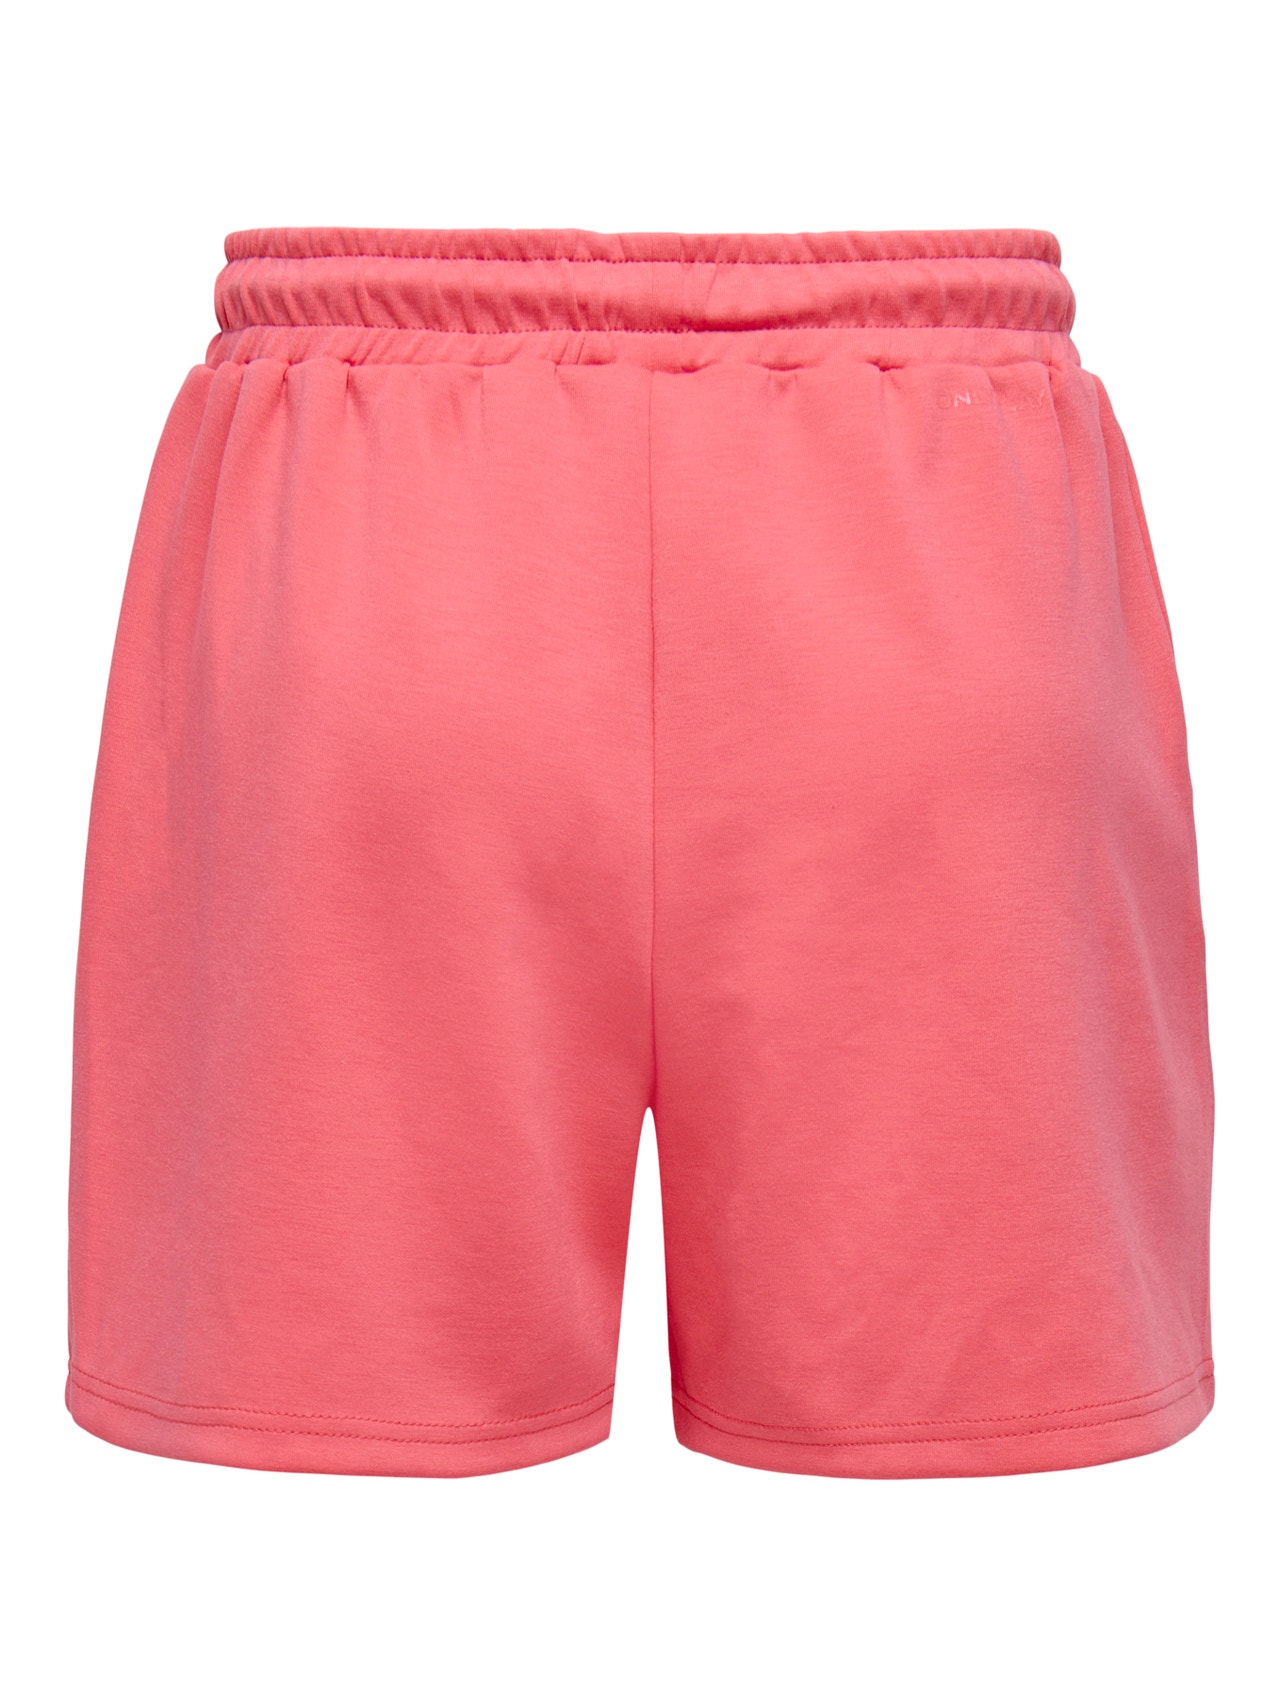 ONLY Solid colored training Sweat shorts -Sun Kissed Coral - 15245851